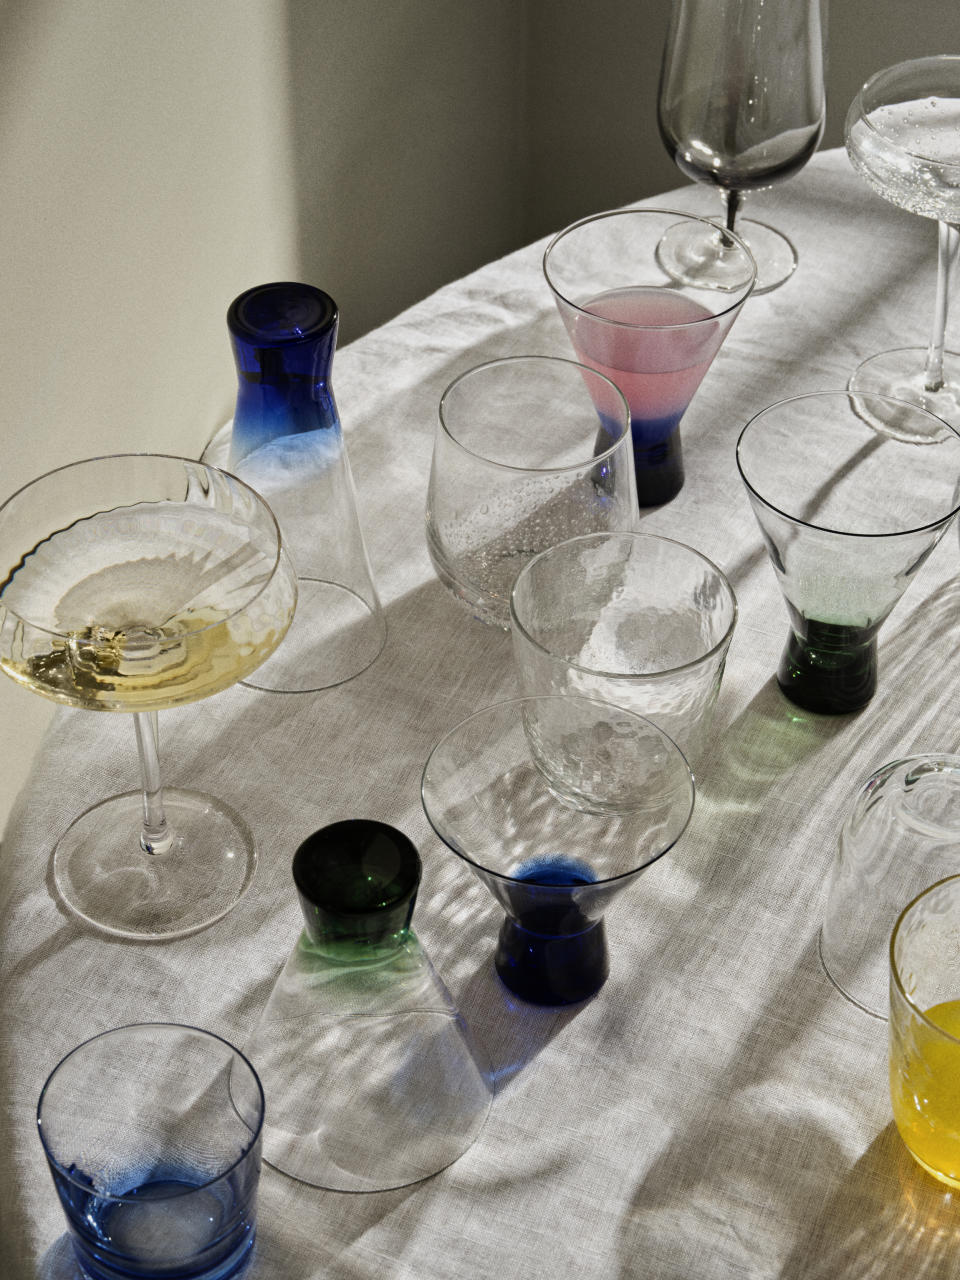 A large table with different types of wine glasses